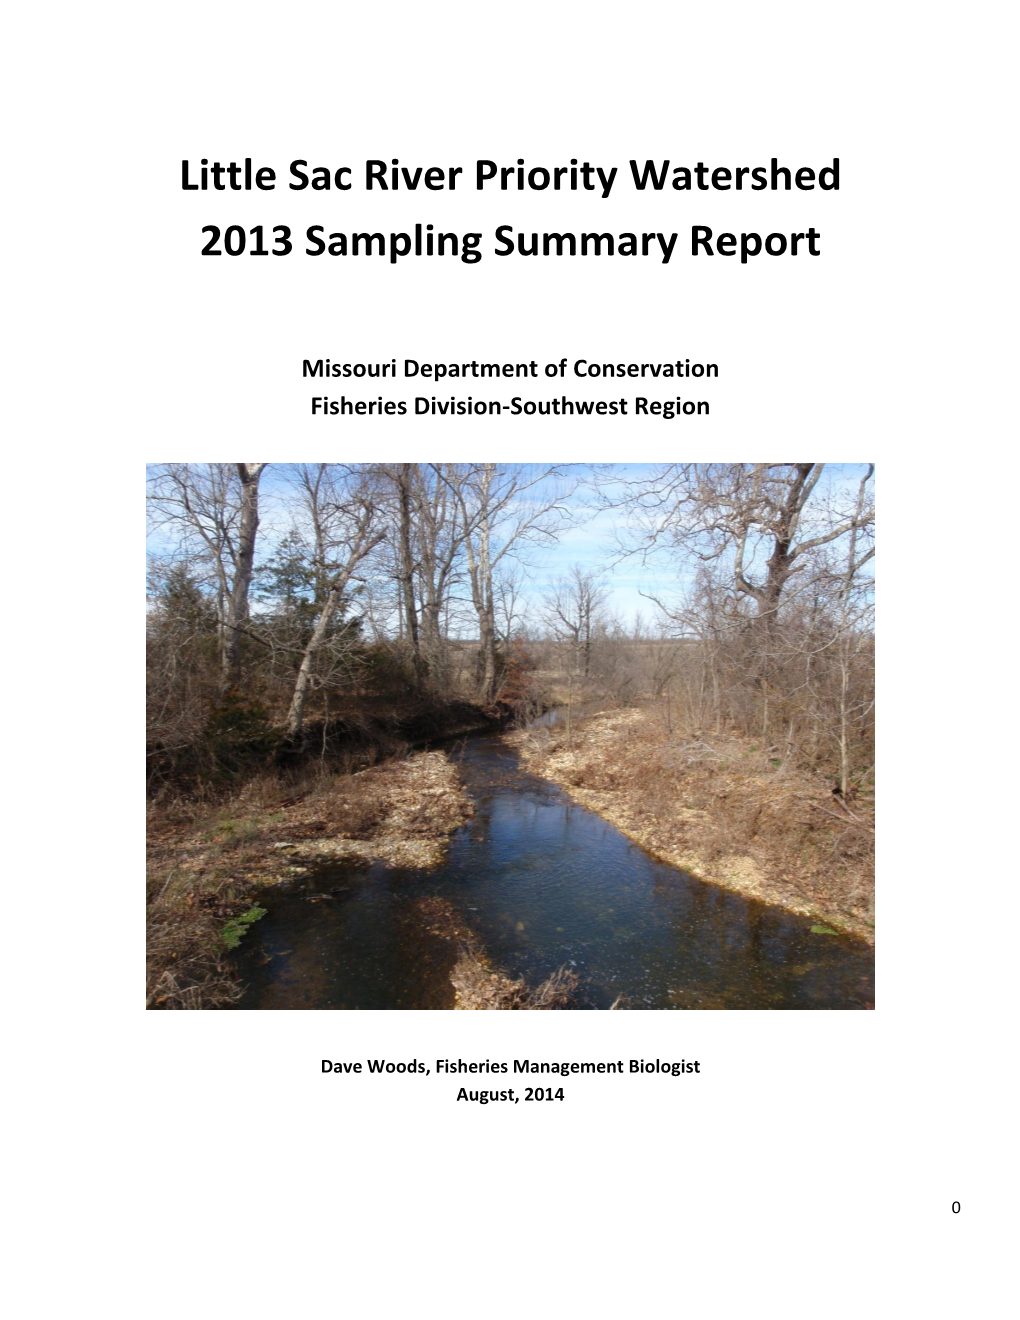 Little Sac River Priority Watershed 2013 Sampling Summary Report